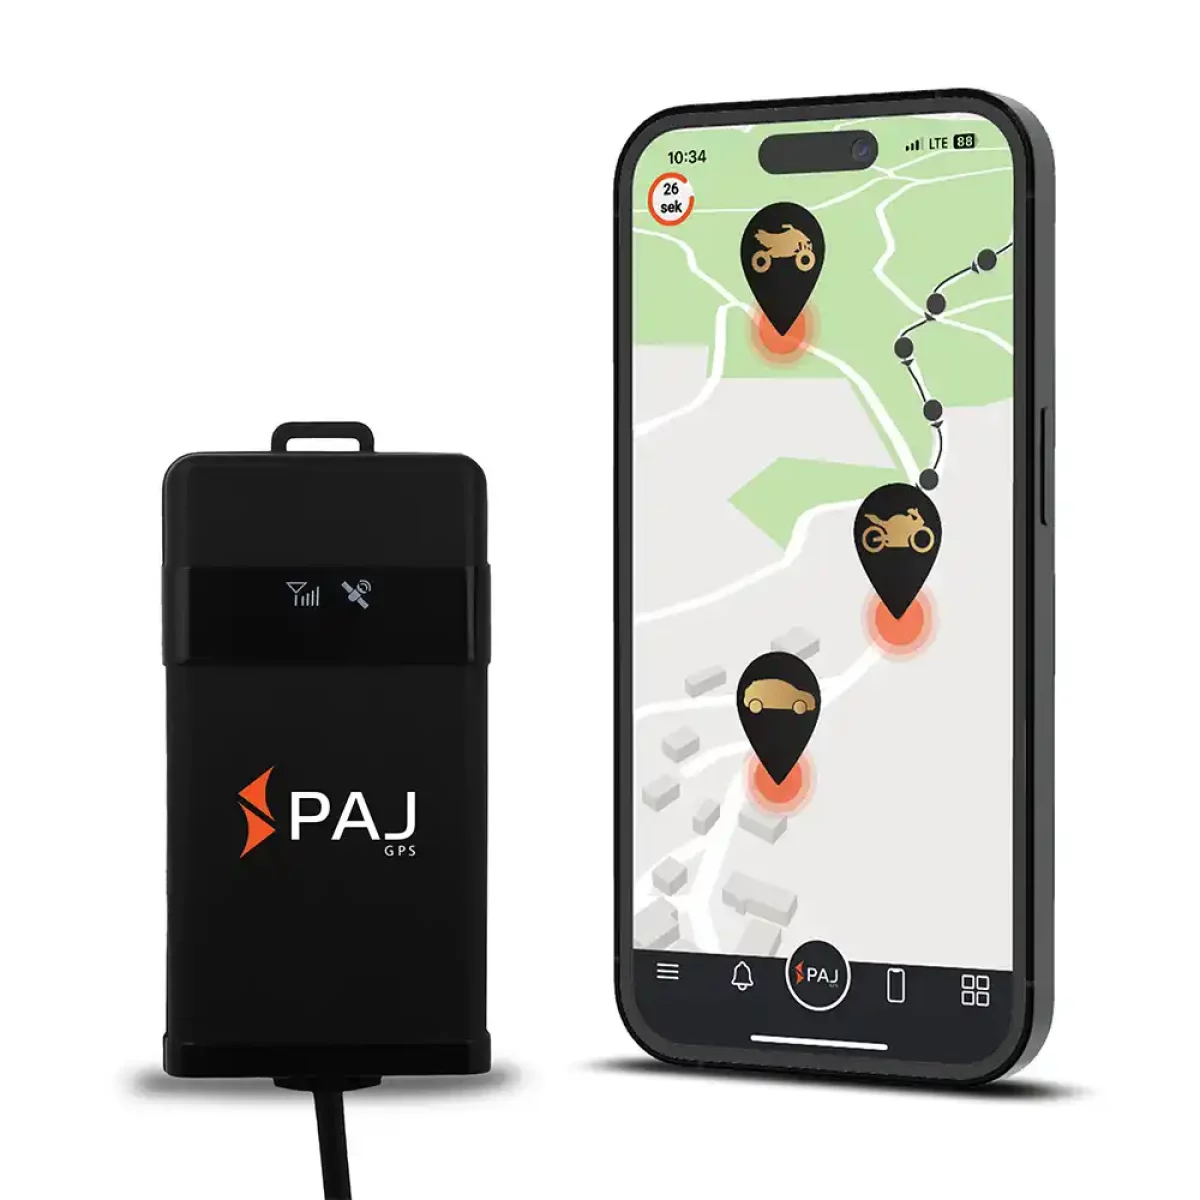 My Thoughts on the PAJ Power Finder 4G Car Tracker – PAJ GPS Tracker Review